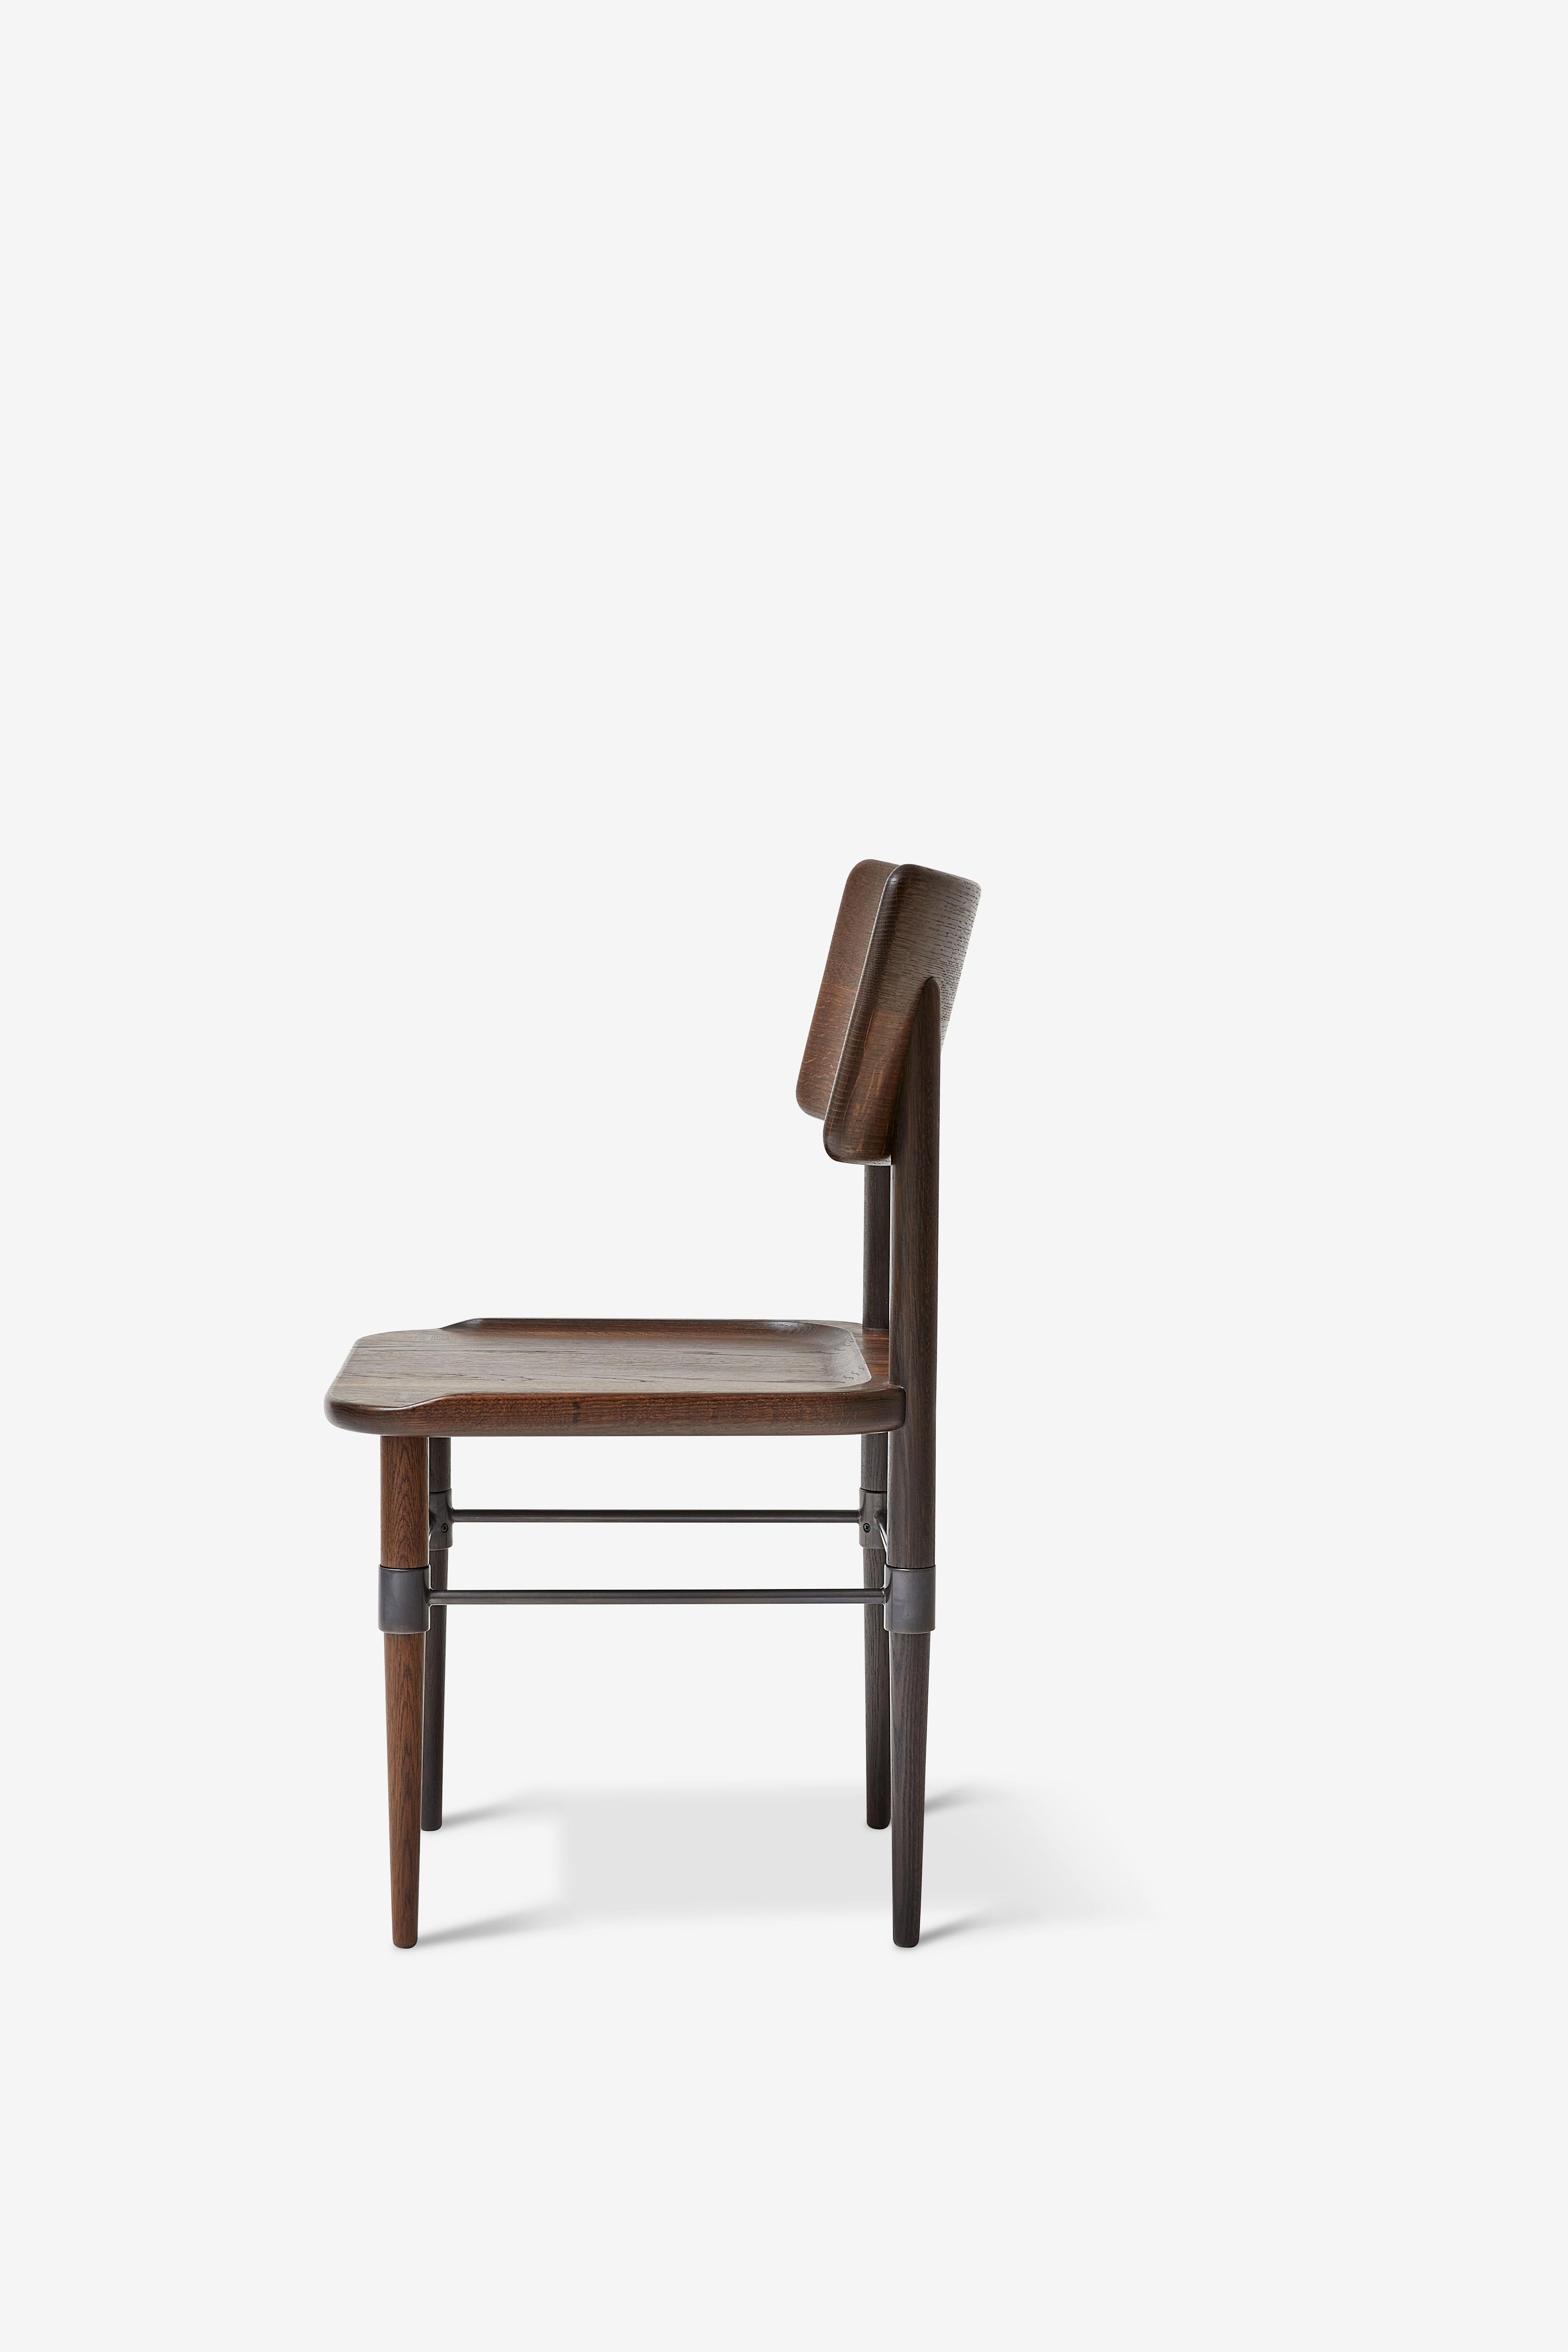 MG101 Dining chair in smoked oak and blackened metal. The seat pad is not included and can be ordered separately.

The Holmen series originates in a series of furniture, which was developed for Michelin restaurant 108 in Copenhagen. The common